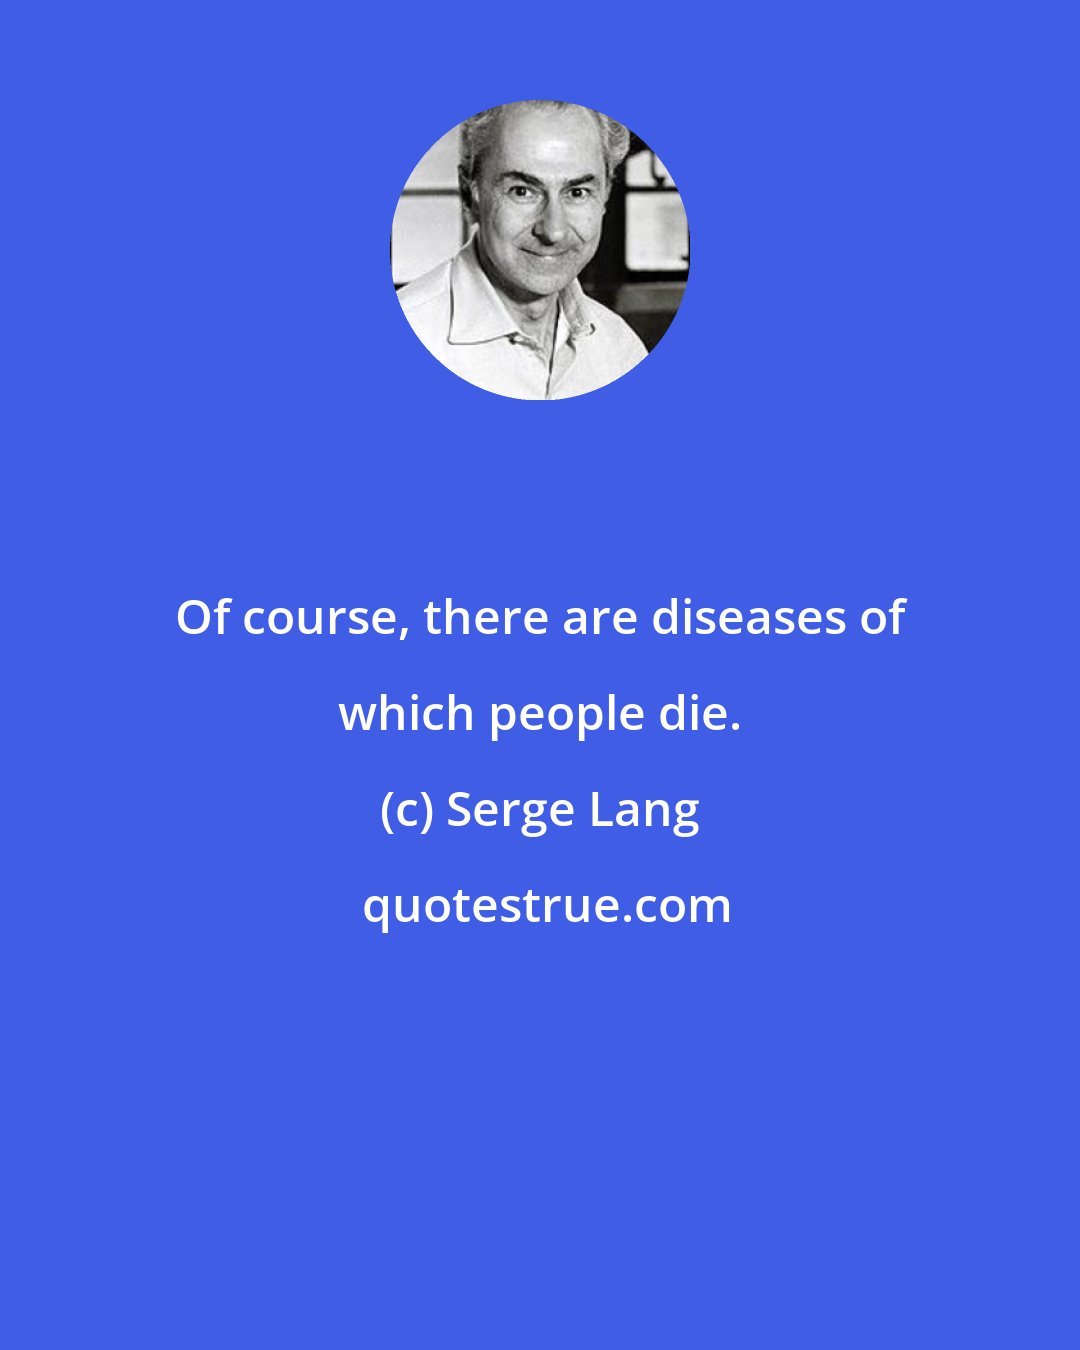 Serge Lang: Of course, there are diseases of which people die.